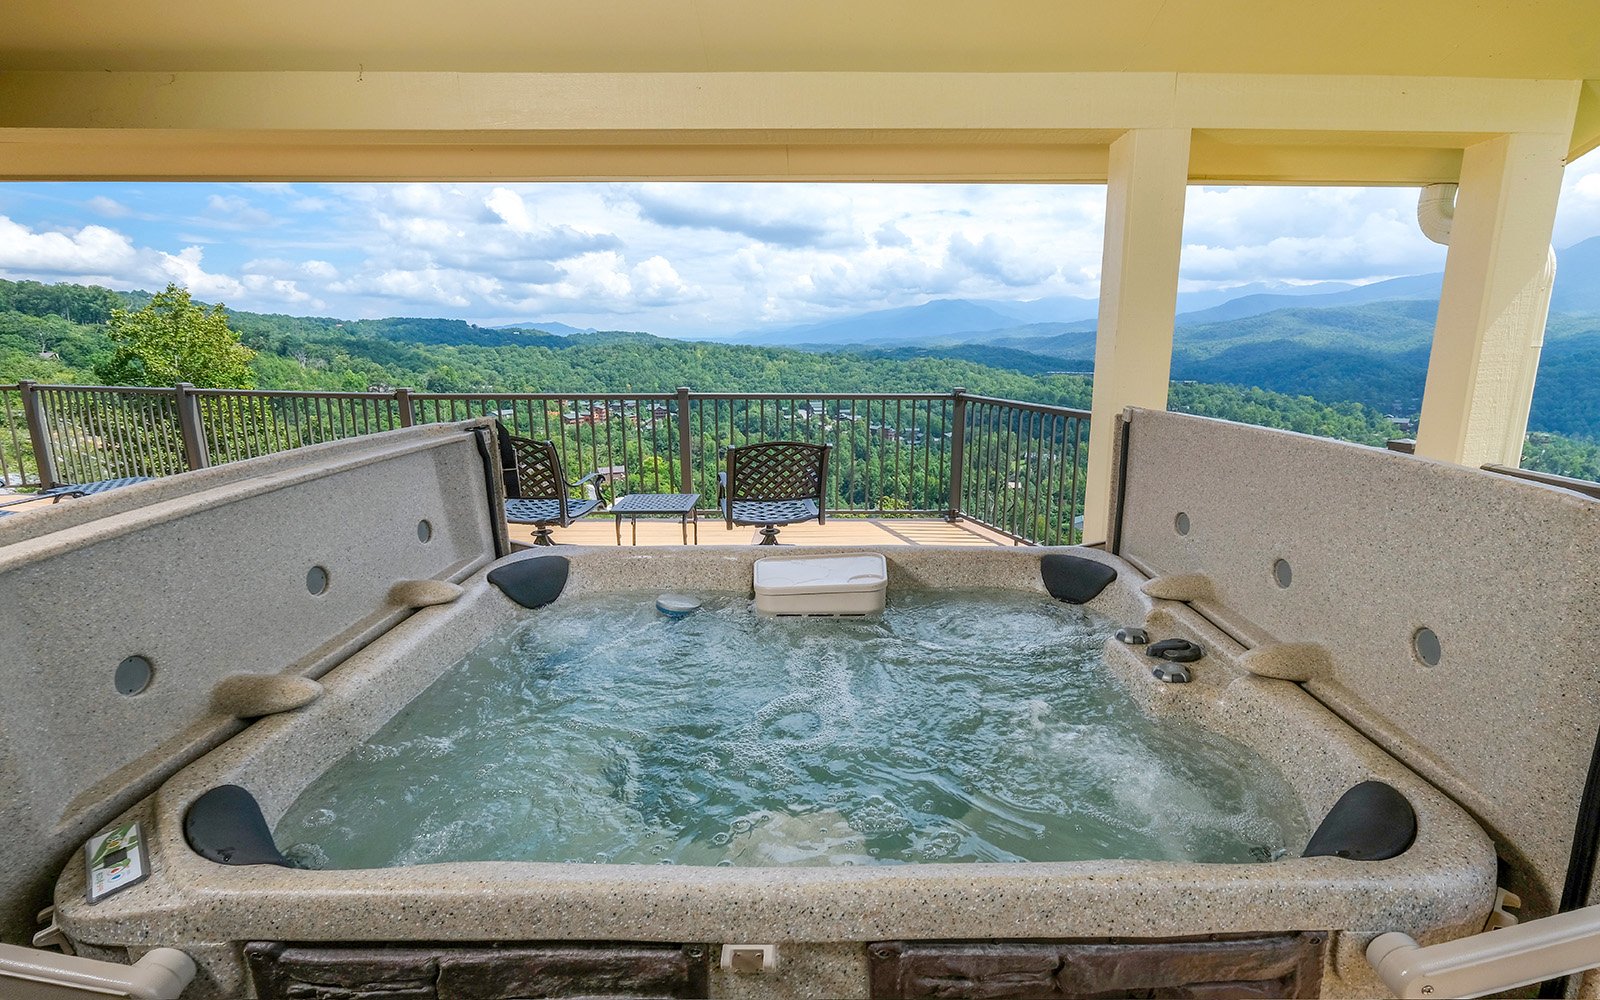 Falcon's View - Stargaze and enjoy mountain views from your hot tub!